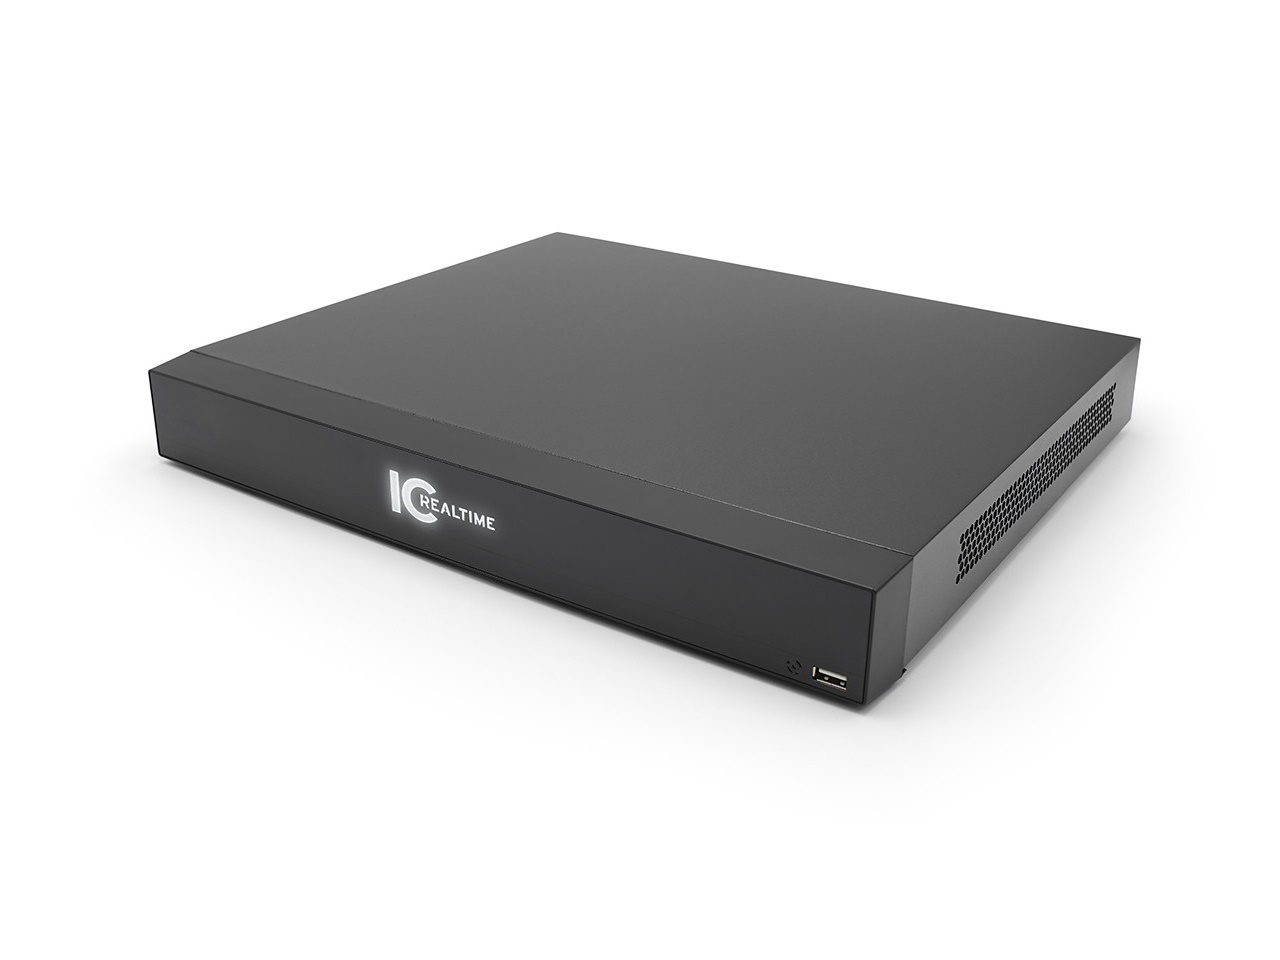 ICRealtime NVR-MX08POE-1U4K1-2TB 8 Channel 1U NVR/Integrated 8 Port POE Switch/Supports 8MP Resolution/128Mbps Throughput/H.264/2TB